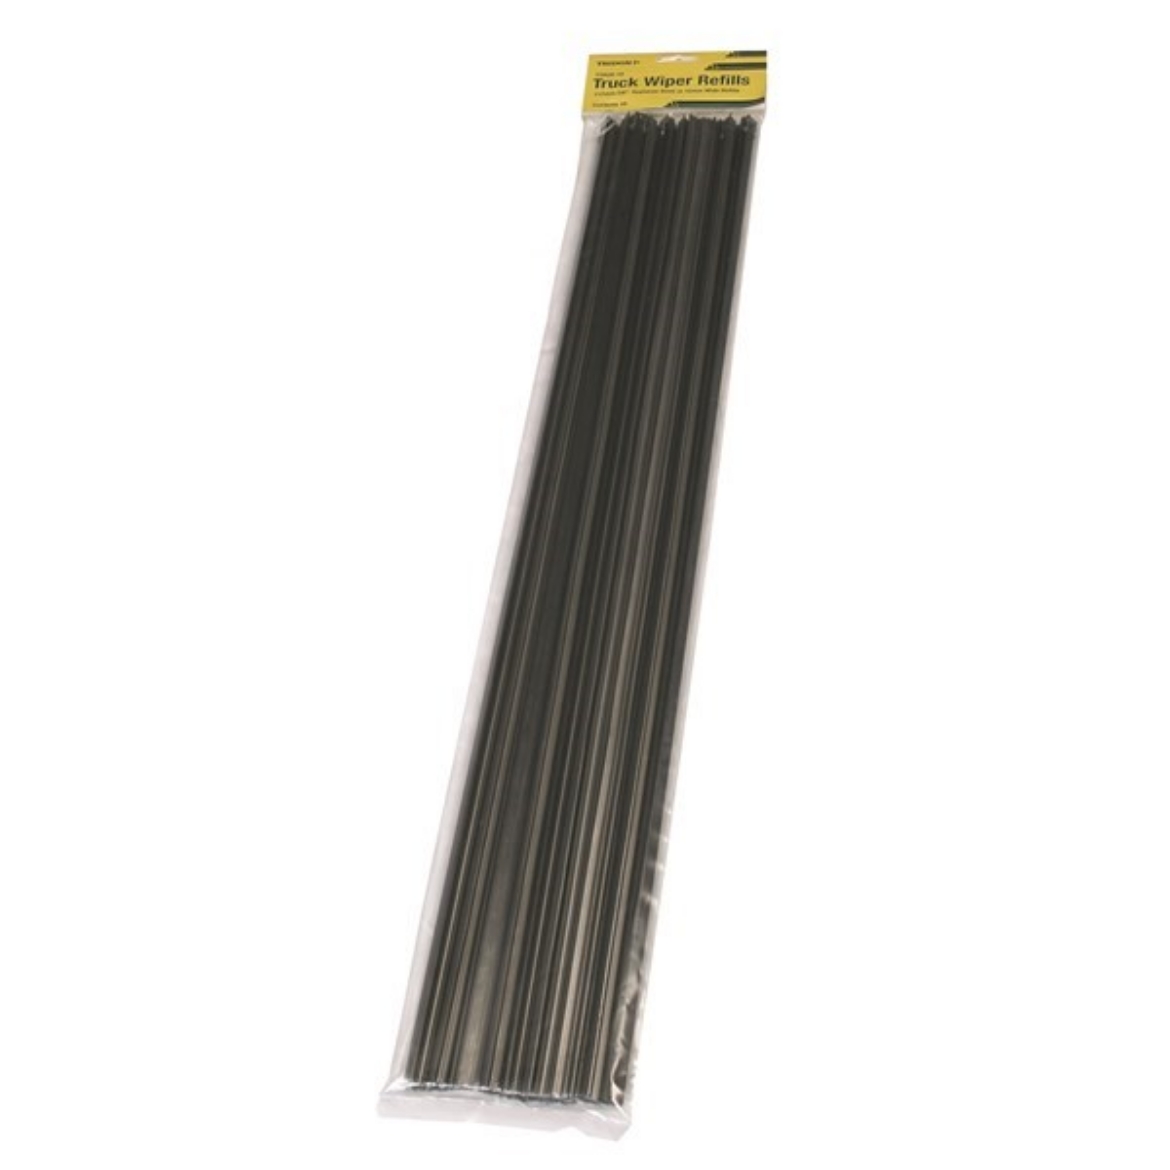 Picture of TRUCK AND BUS - PLASTIC UNIVERSAL WIPER REFILS
710mm (28") x 8mm & 12mm Back